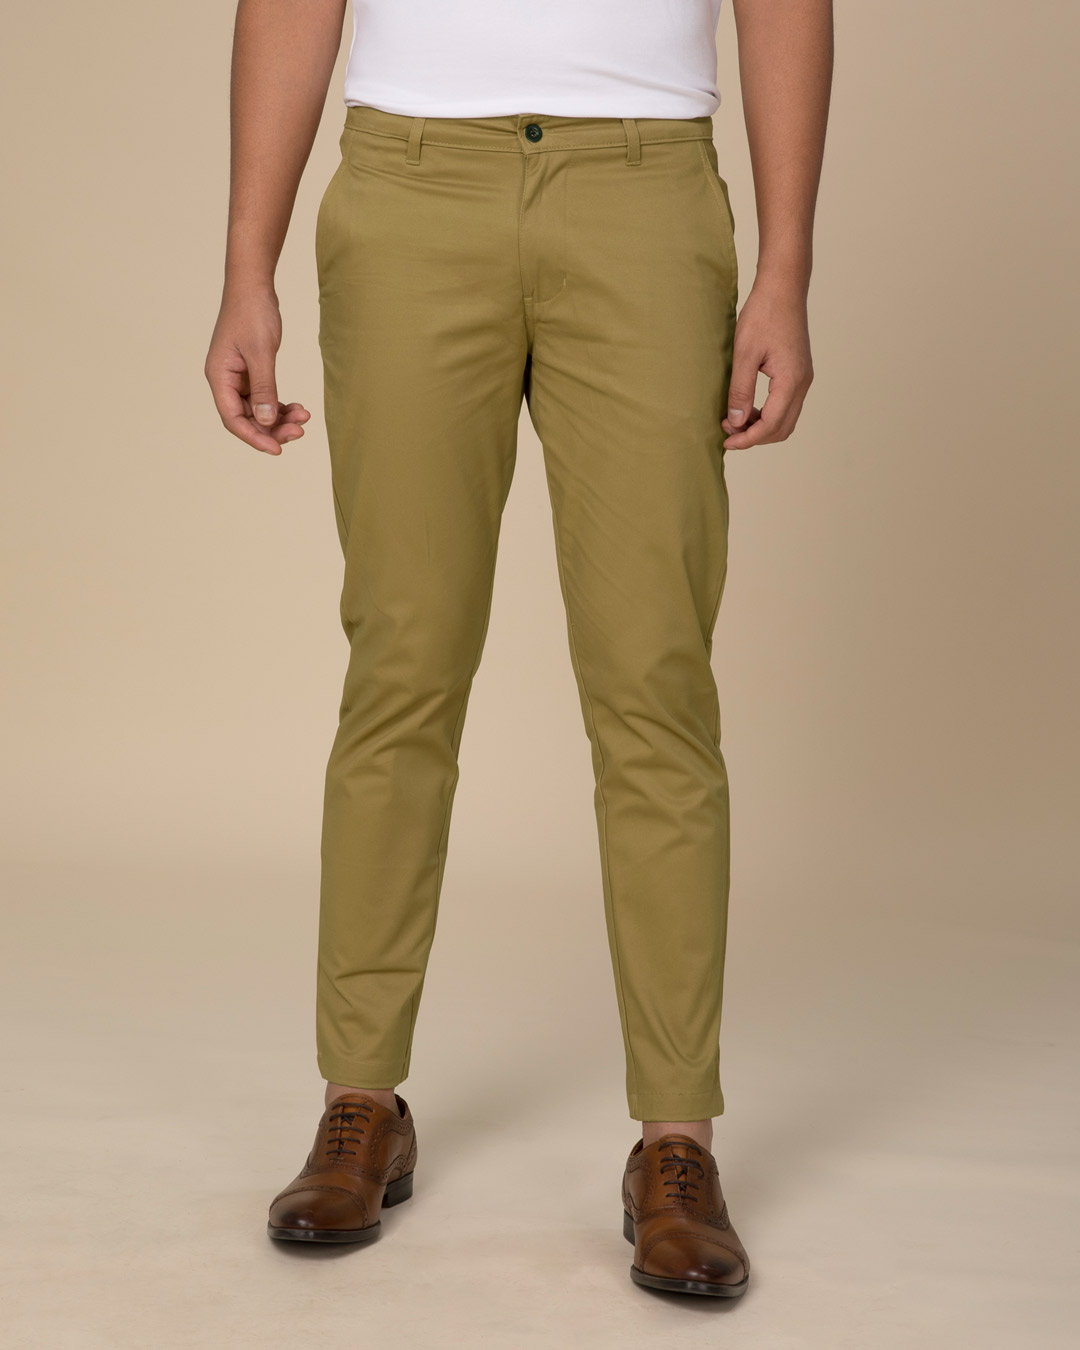 Buy Indian Terrain Khaki Skinny Fit Trousers from top Brands at Best Prices  Online in India  Tata CLiQ